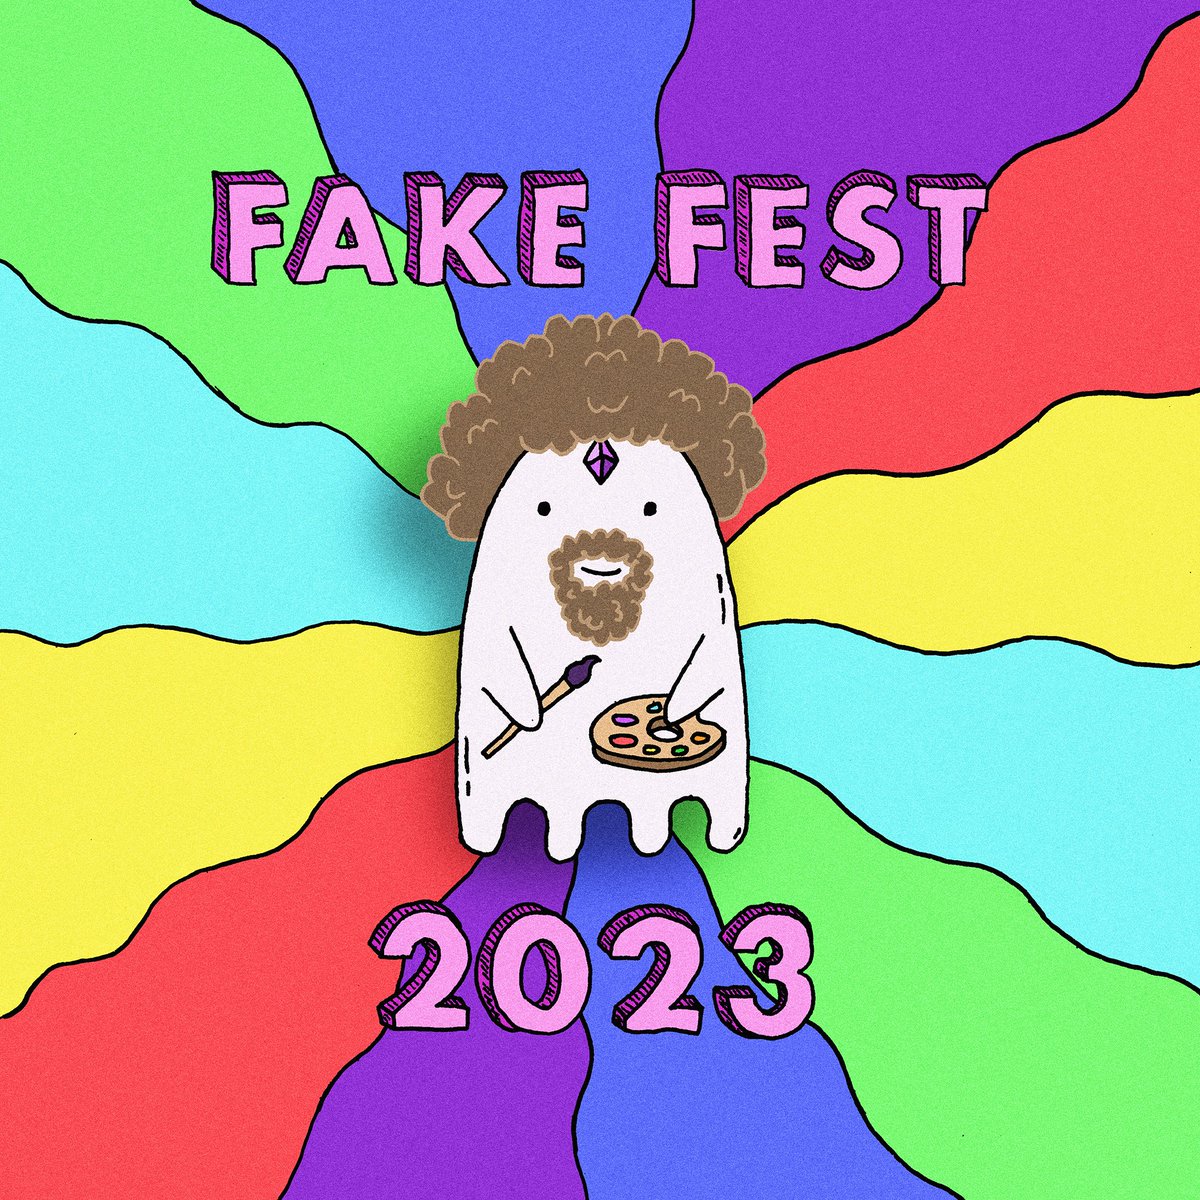 The day is here frens!

#FAKEfest is kicking off right after the @aavegotchi community call. 12 pm EST the FAKEfun begins.

Come hear from the #creators and #collectors making the @FAKEgotchis dream come true. #NFTs with this much love embedded, you will not find.